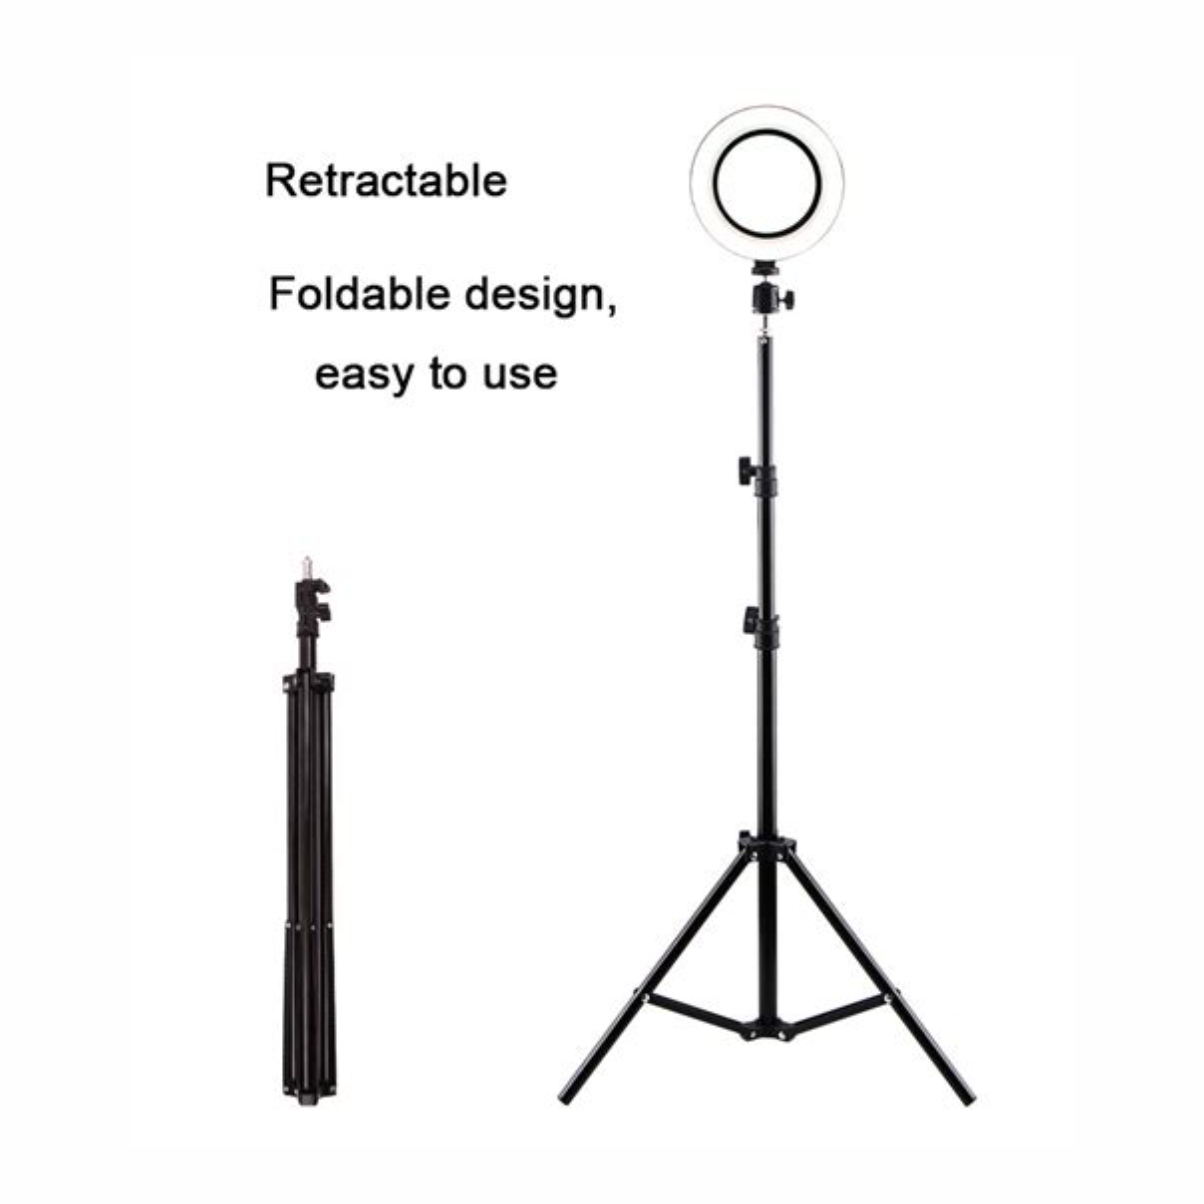 7 FIT METAL STAND, Big Tripod Stand for Phone and Camera Adjustable, Photo/Video Shoot,Instagram Reels/YouTube Videos with Mobile Clip Holder Bracket